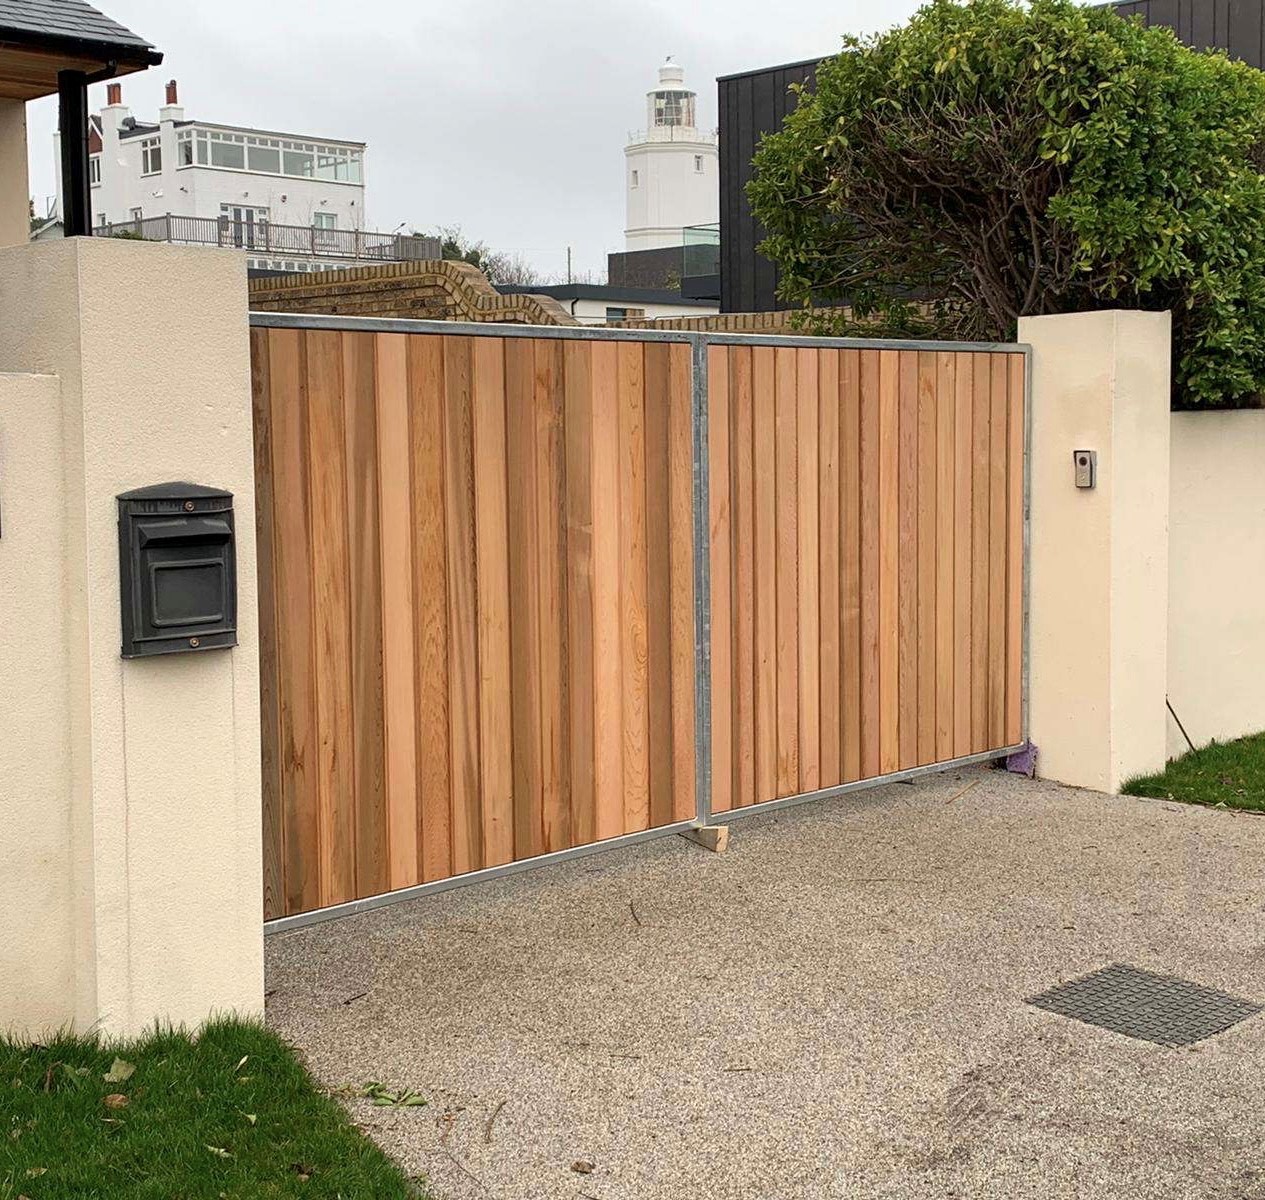 Cladding installed on a gate.